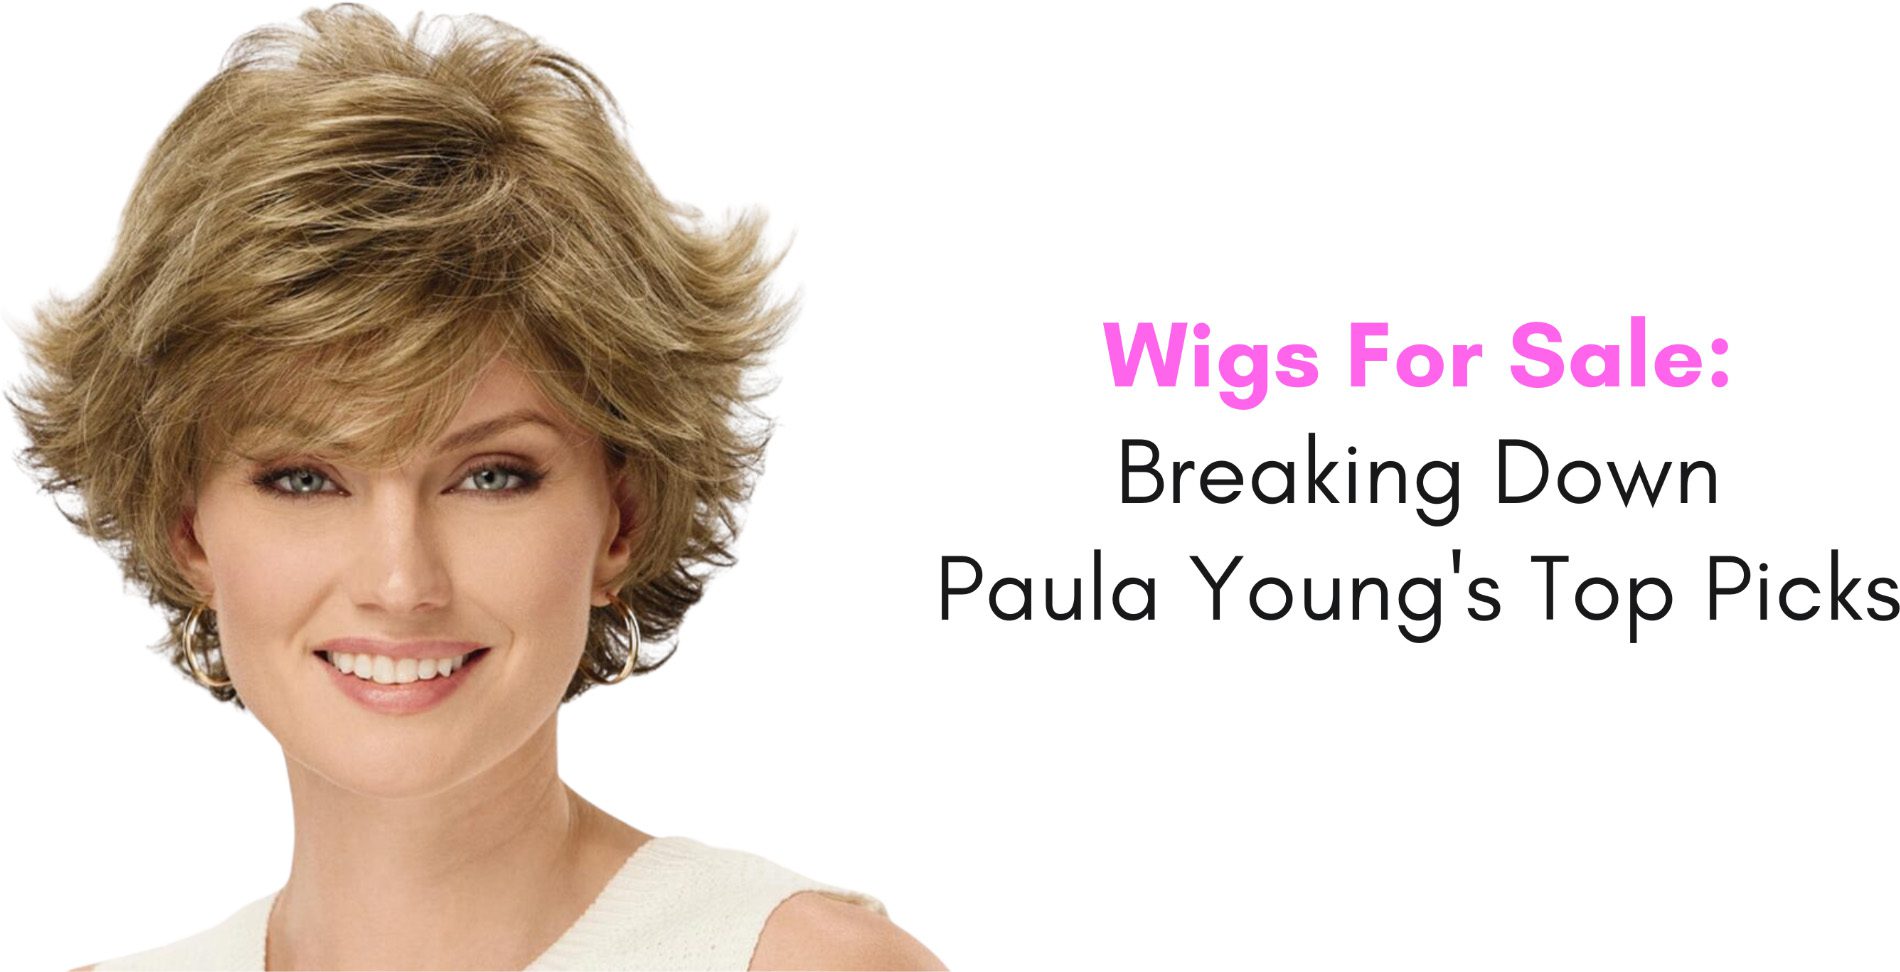 Wigs For Sale: Breaking Down Paula Young’s Top Picks